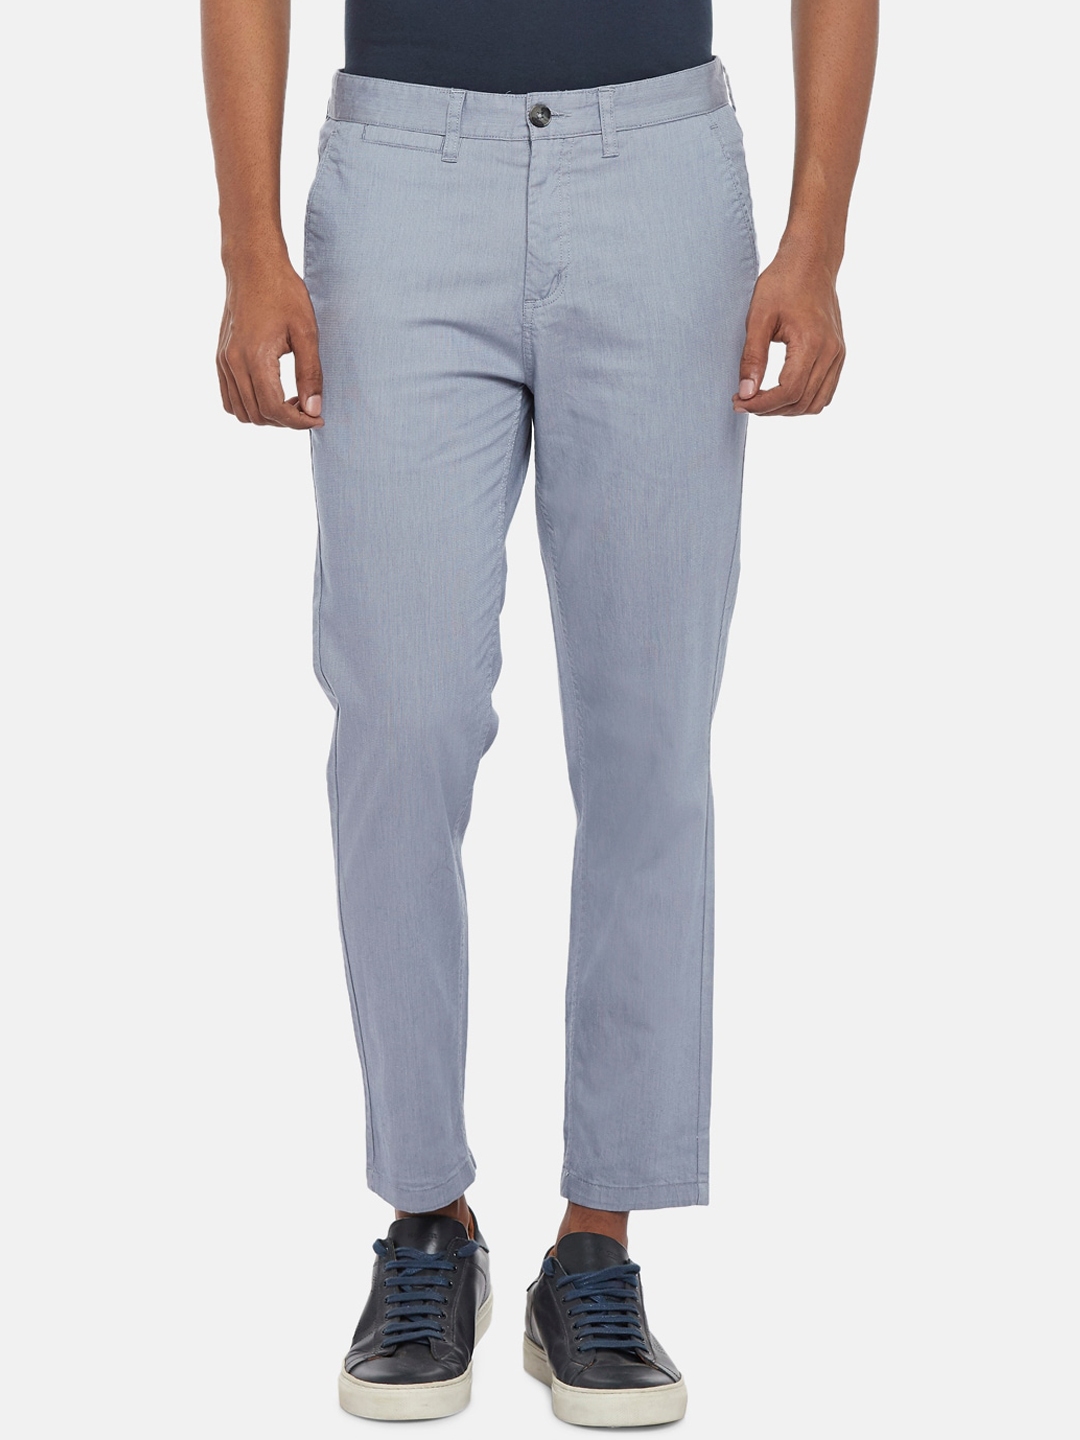 Byford By Pantaloons Grey Solid Regular Fit Chinos - Buy Byford By